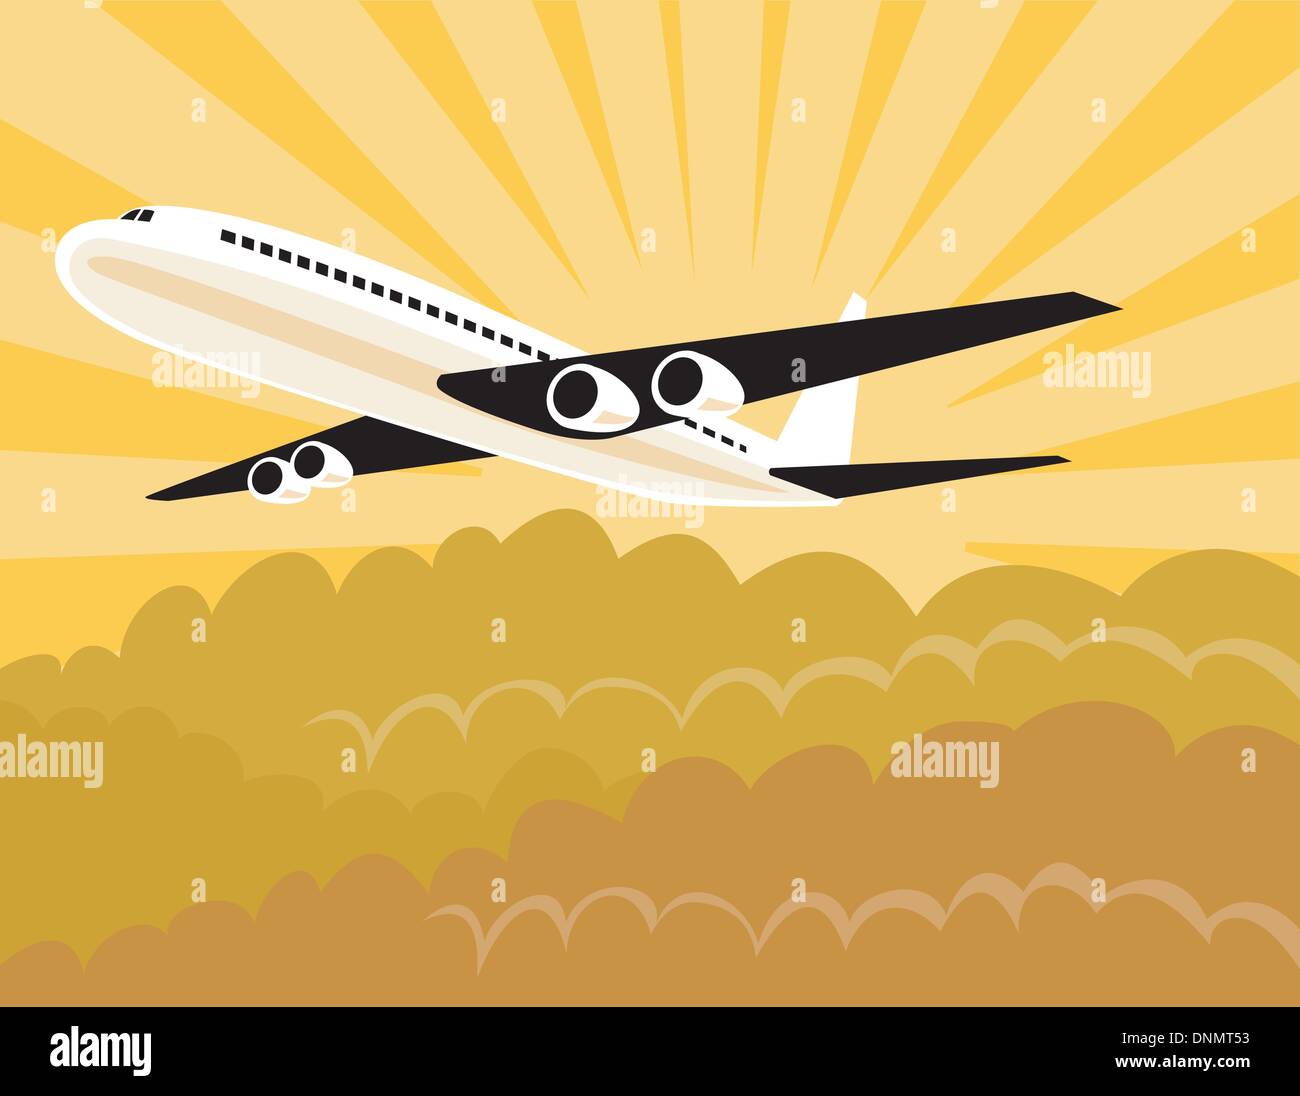 Illustration of a commercial jet plane airliner with sky on background. Stock Vector